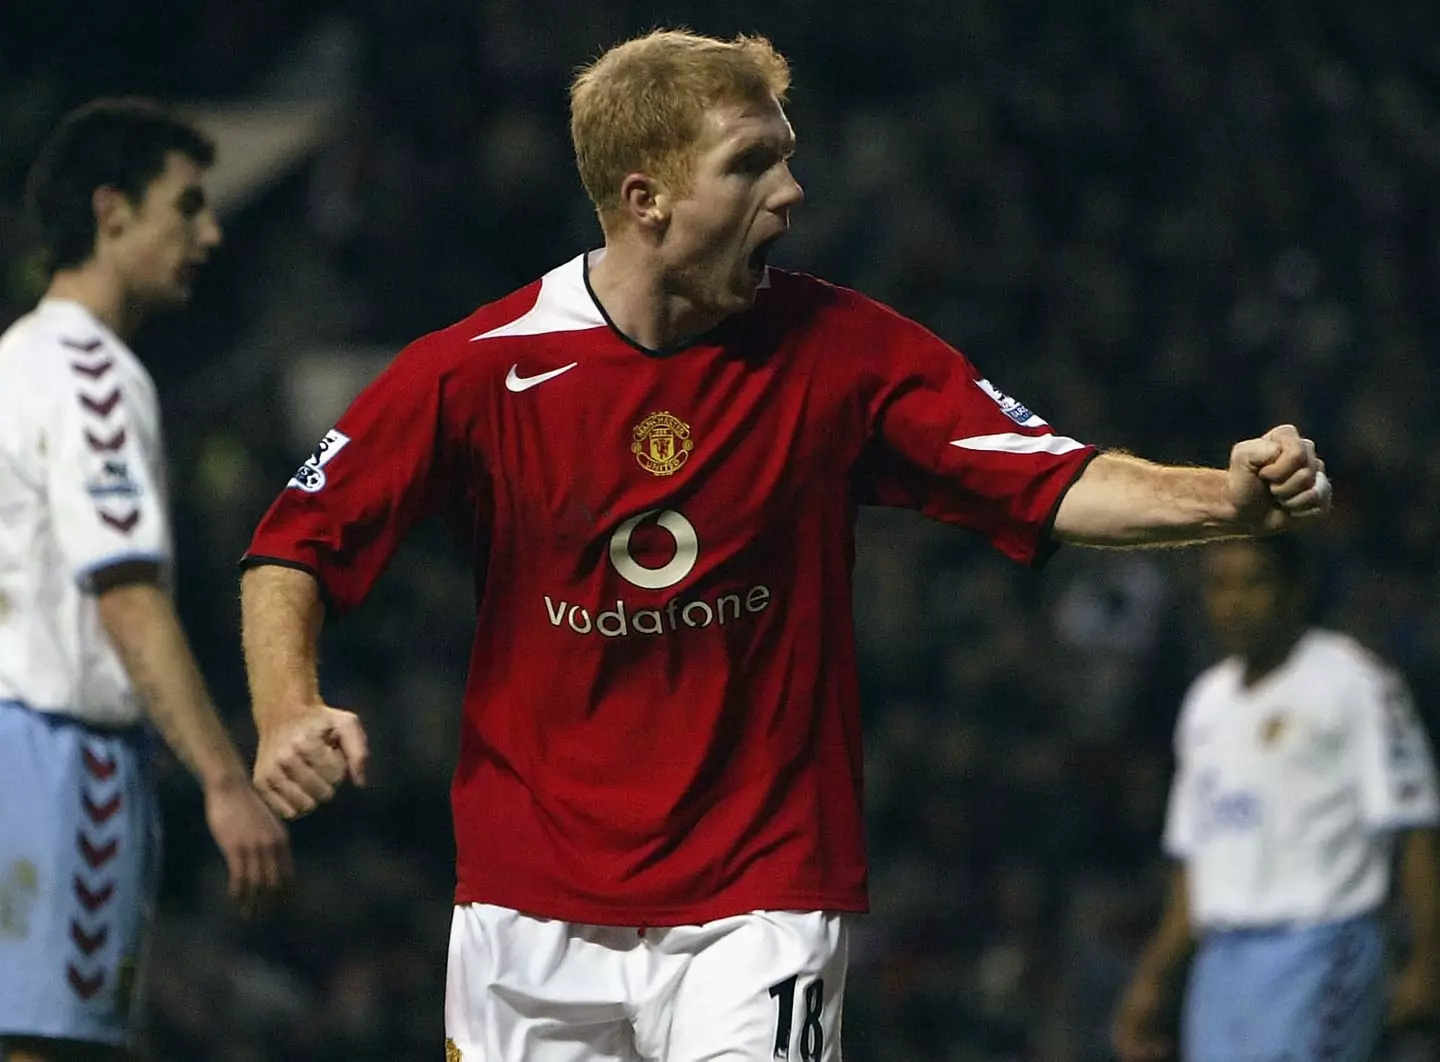 Paul Scholes celebrates scoring a goal for Manchester United. Image: Getty